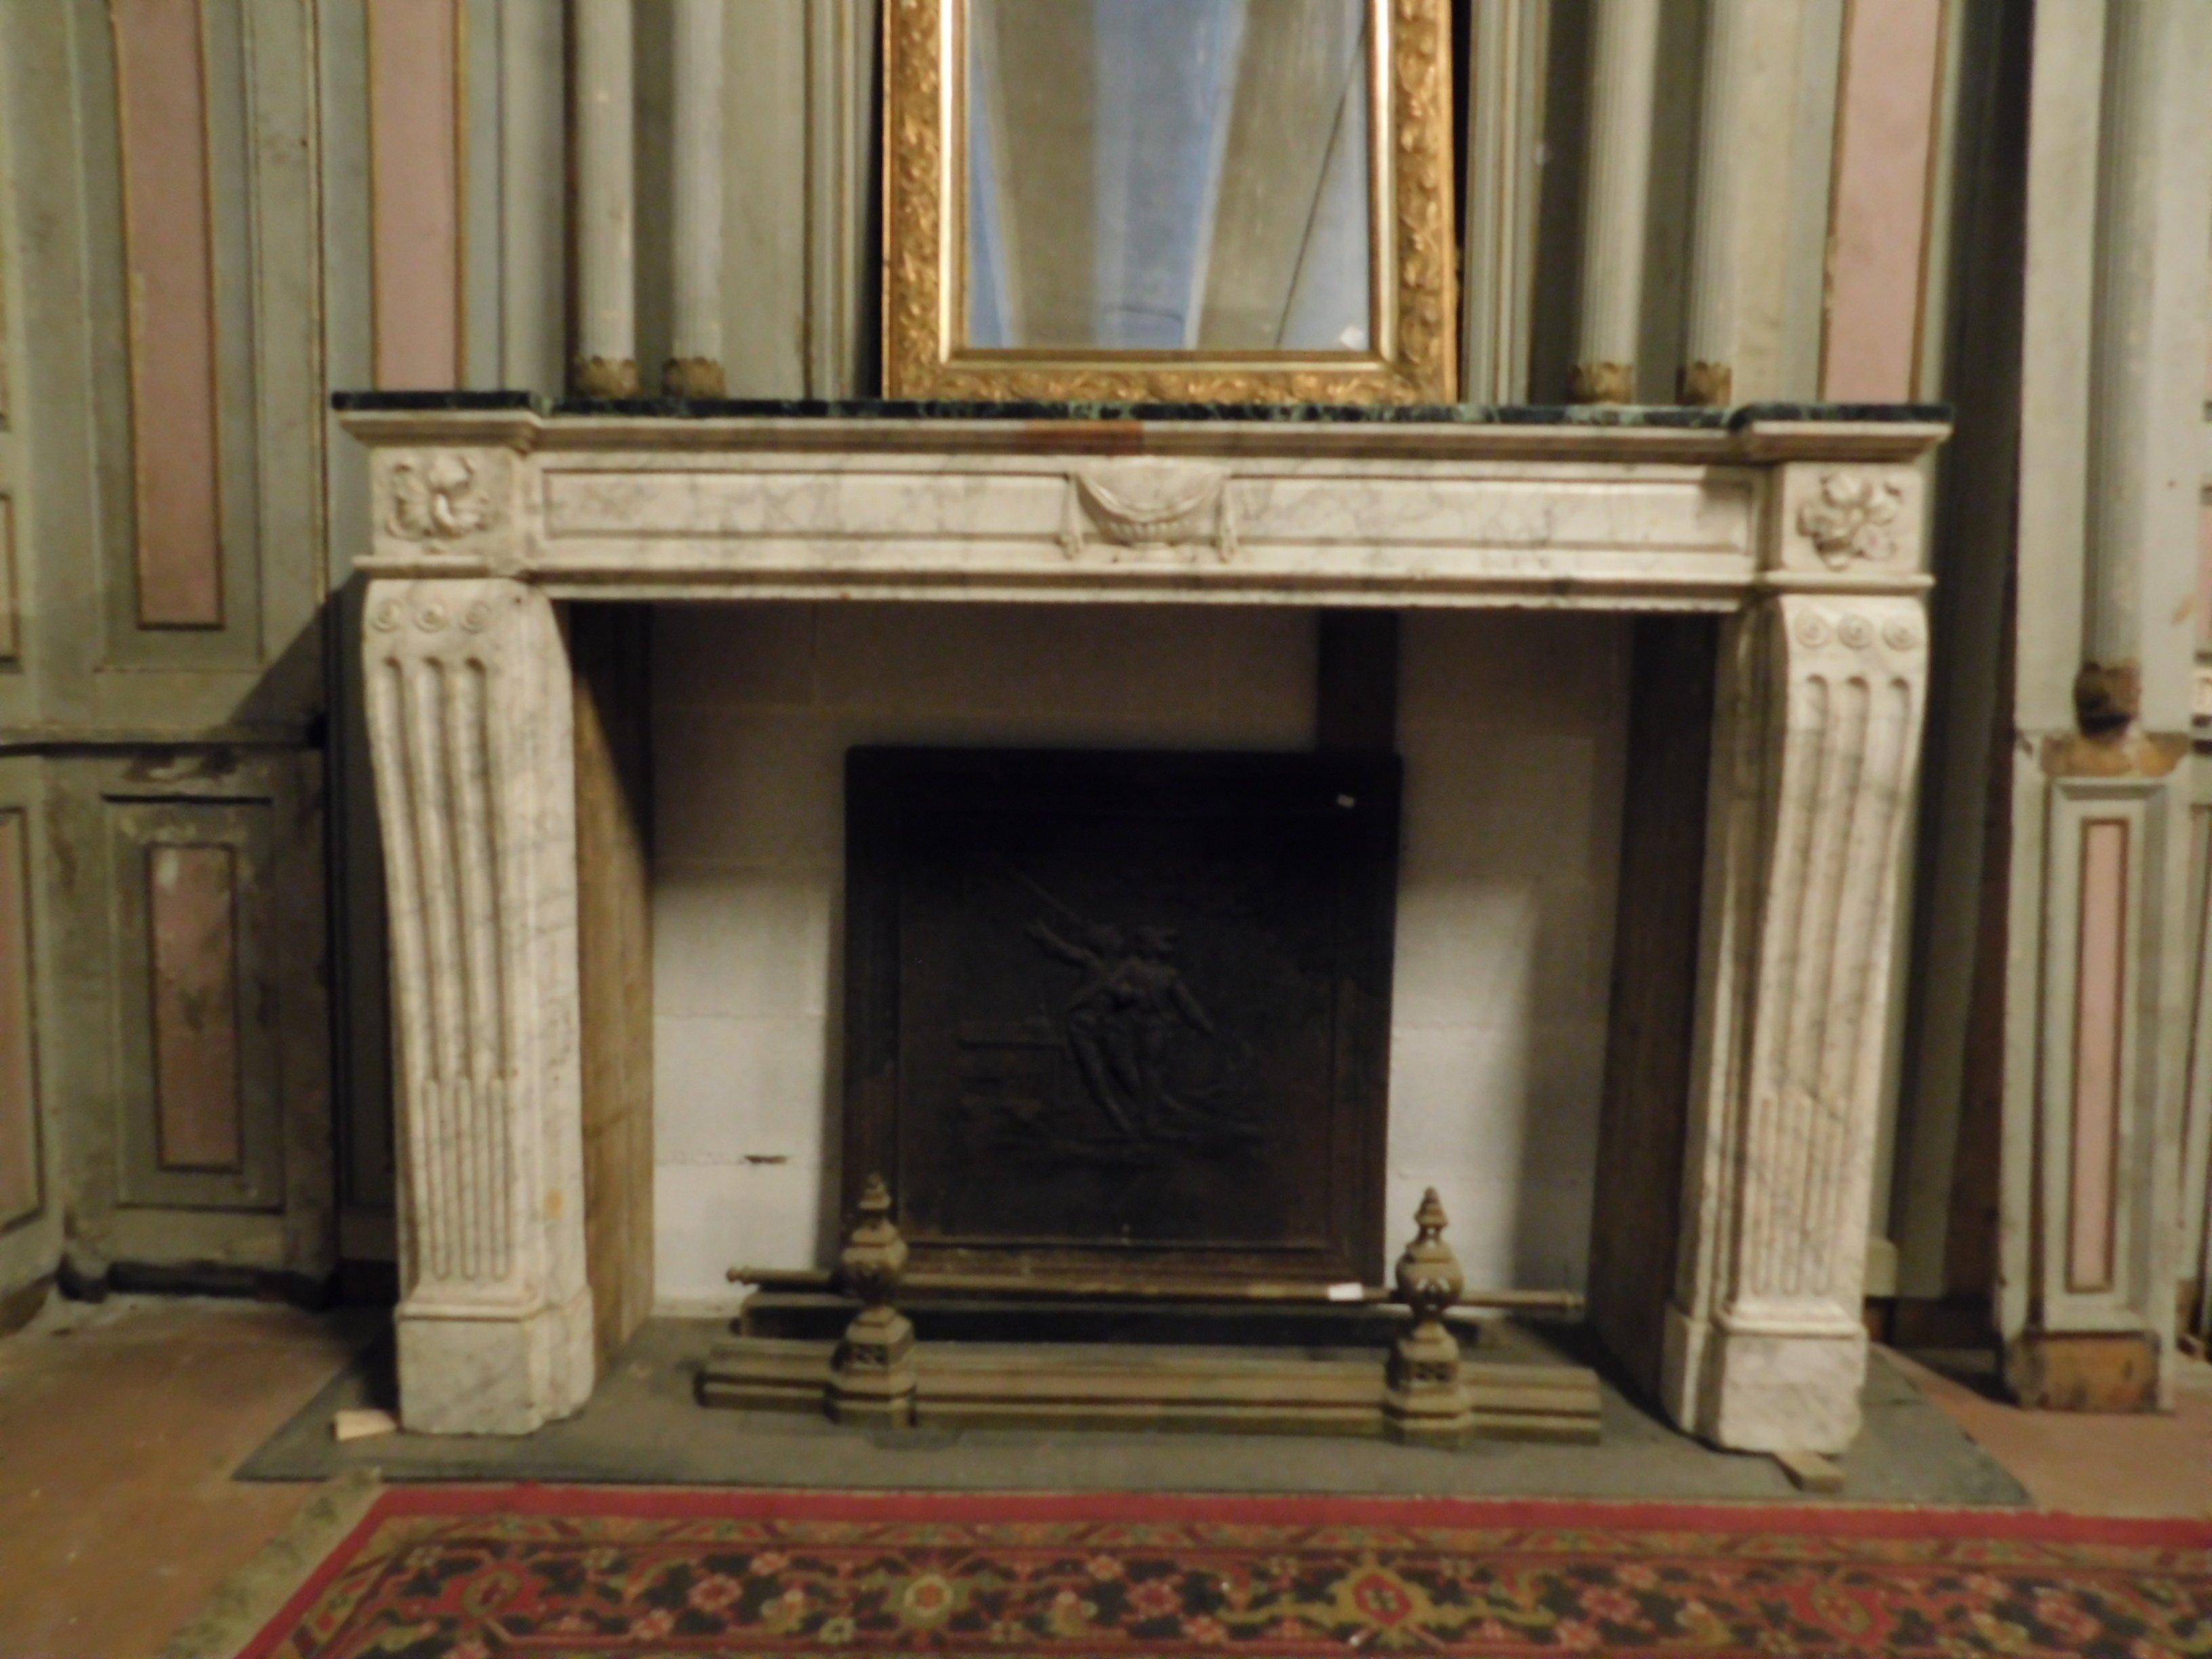 Carrara Marble Antique Fireplace in White and Green Marble, Louis XVI, 18th Century France